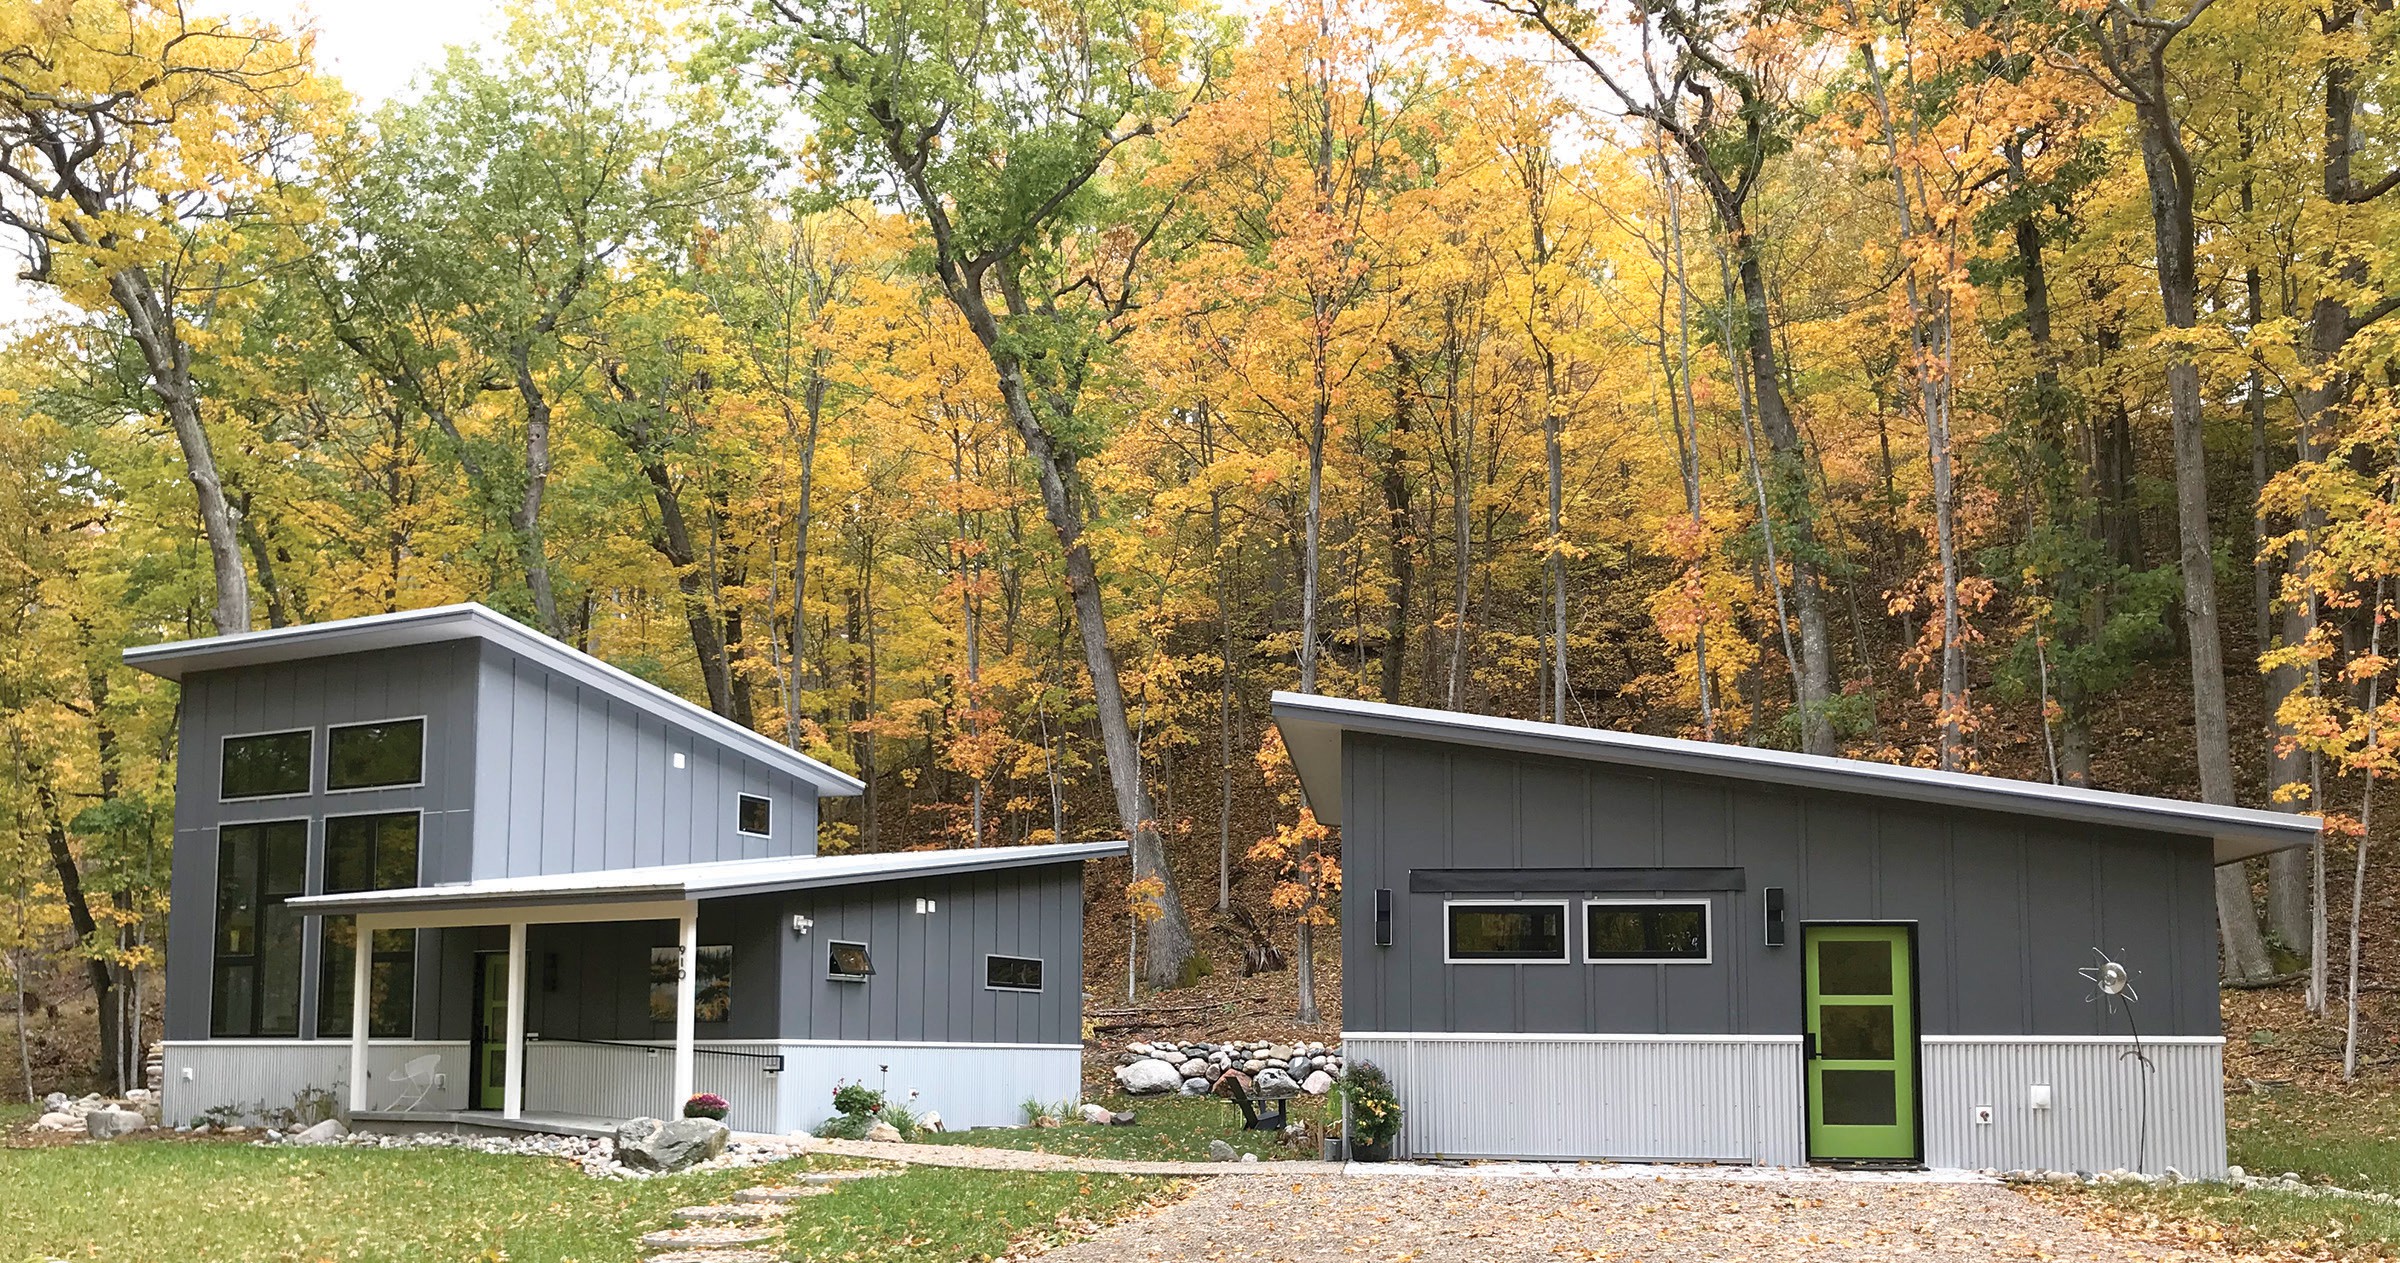 Good Hart Artist Residency offers free room, board, and stipend for writers, composers, and visual artists in the natural surroundings of Michigan. Deadlines to apply: January 12, February 16.